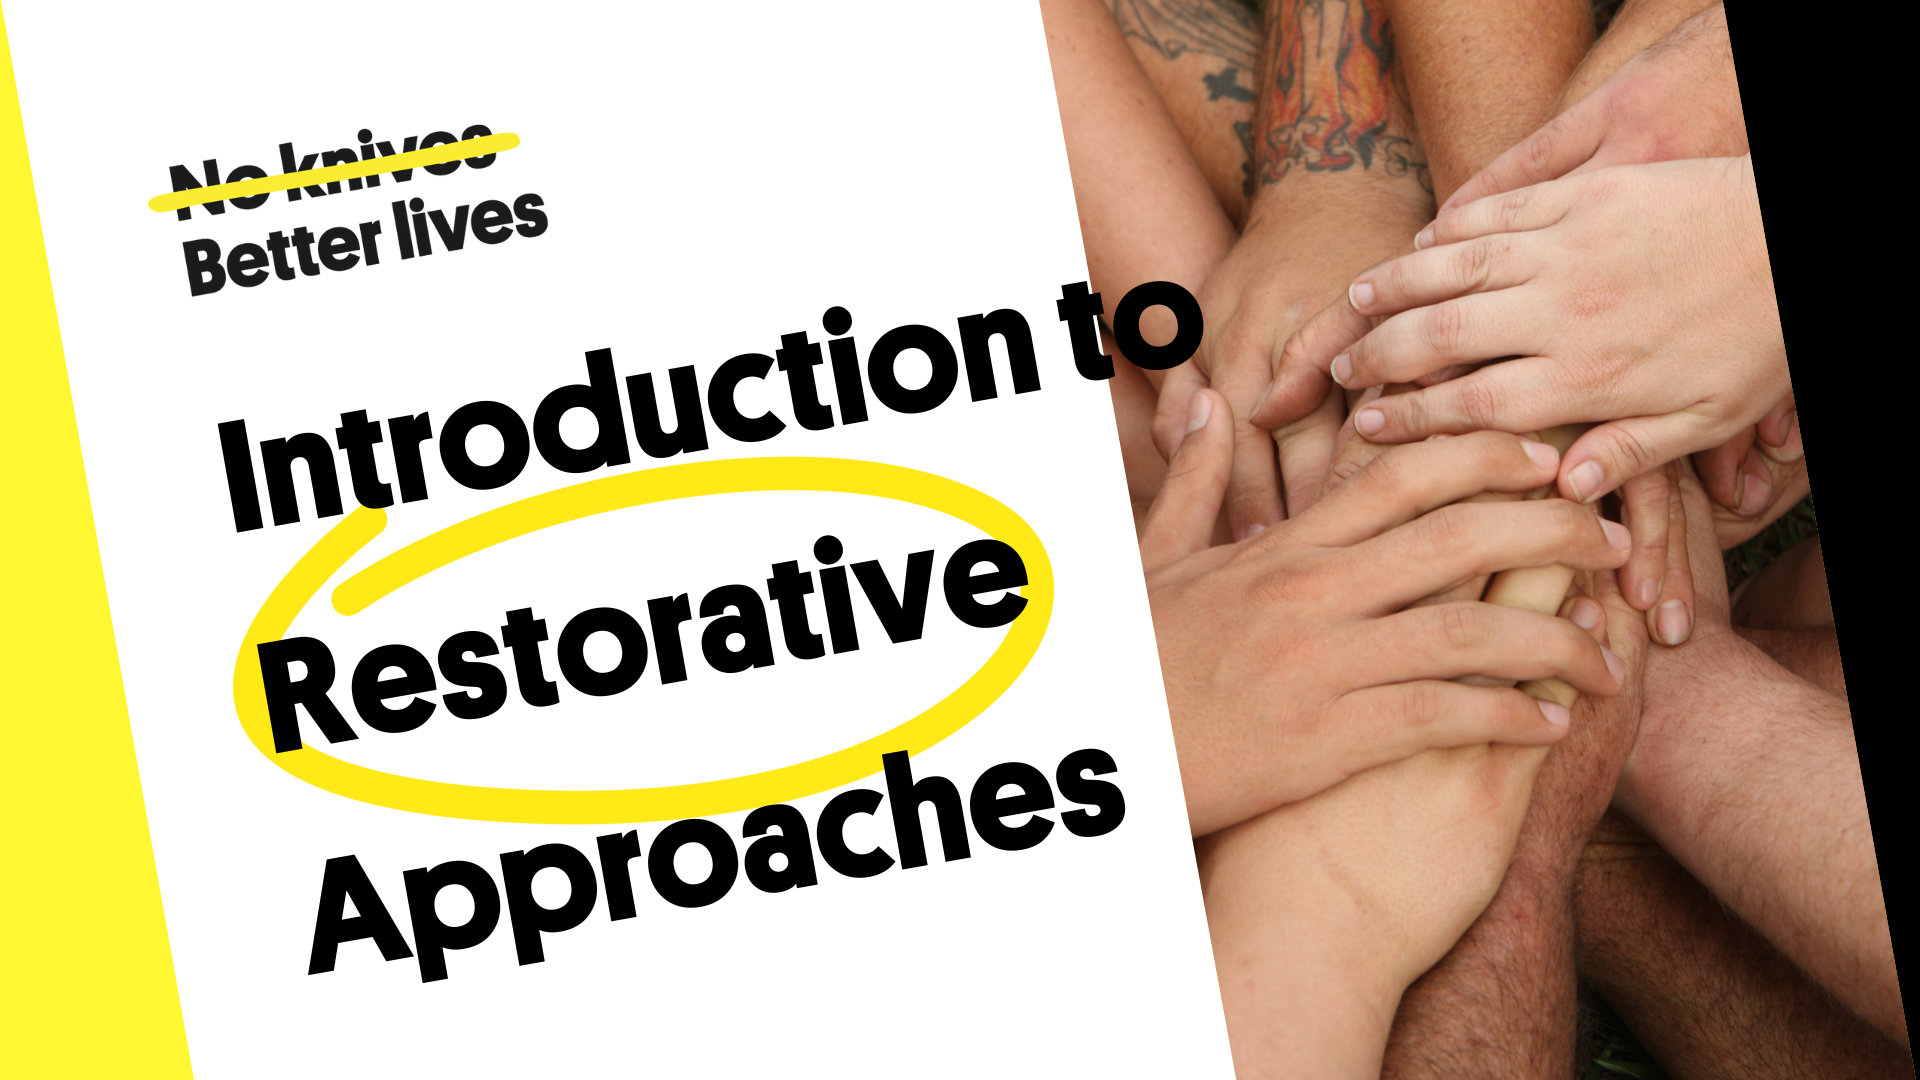 Introduction to Restorative Approaches